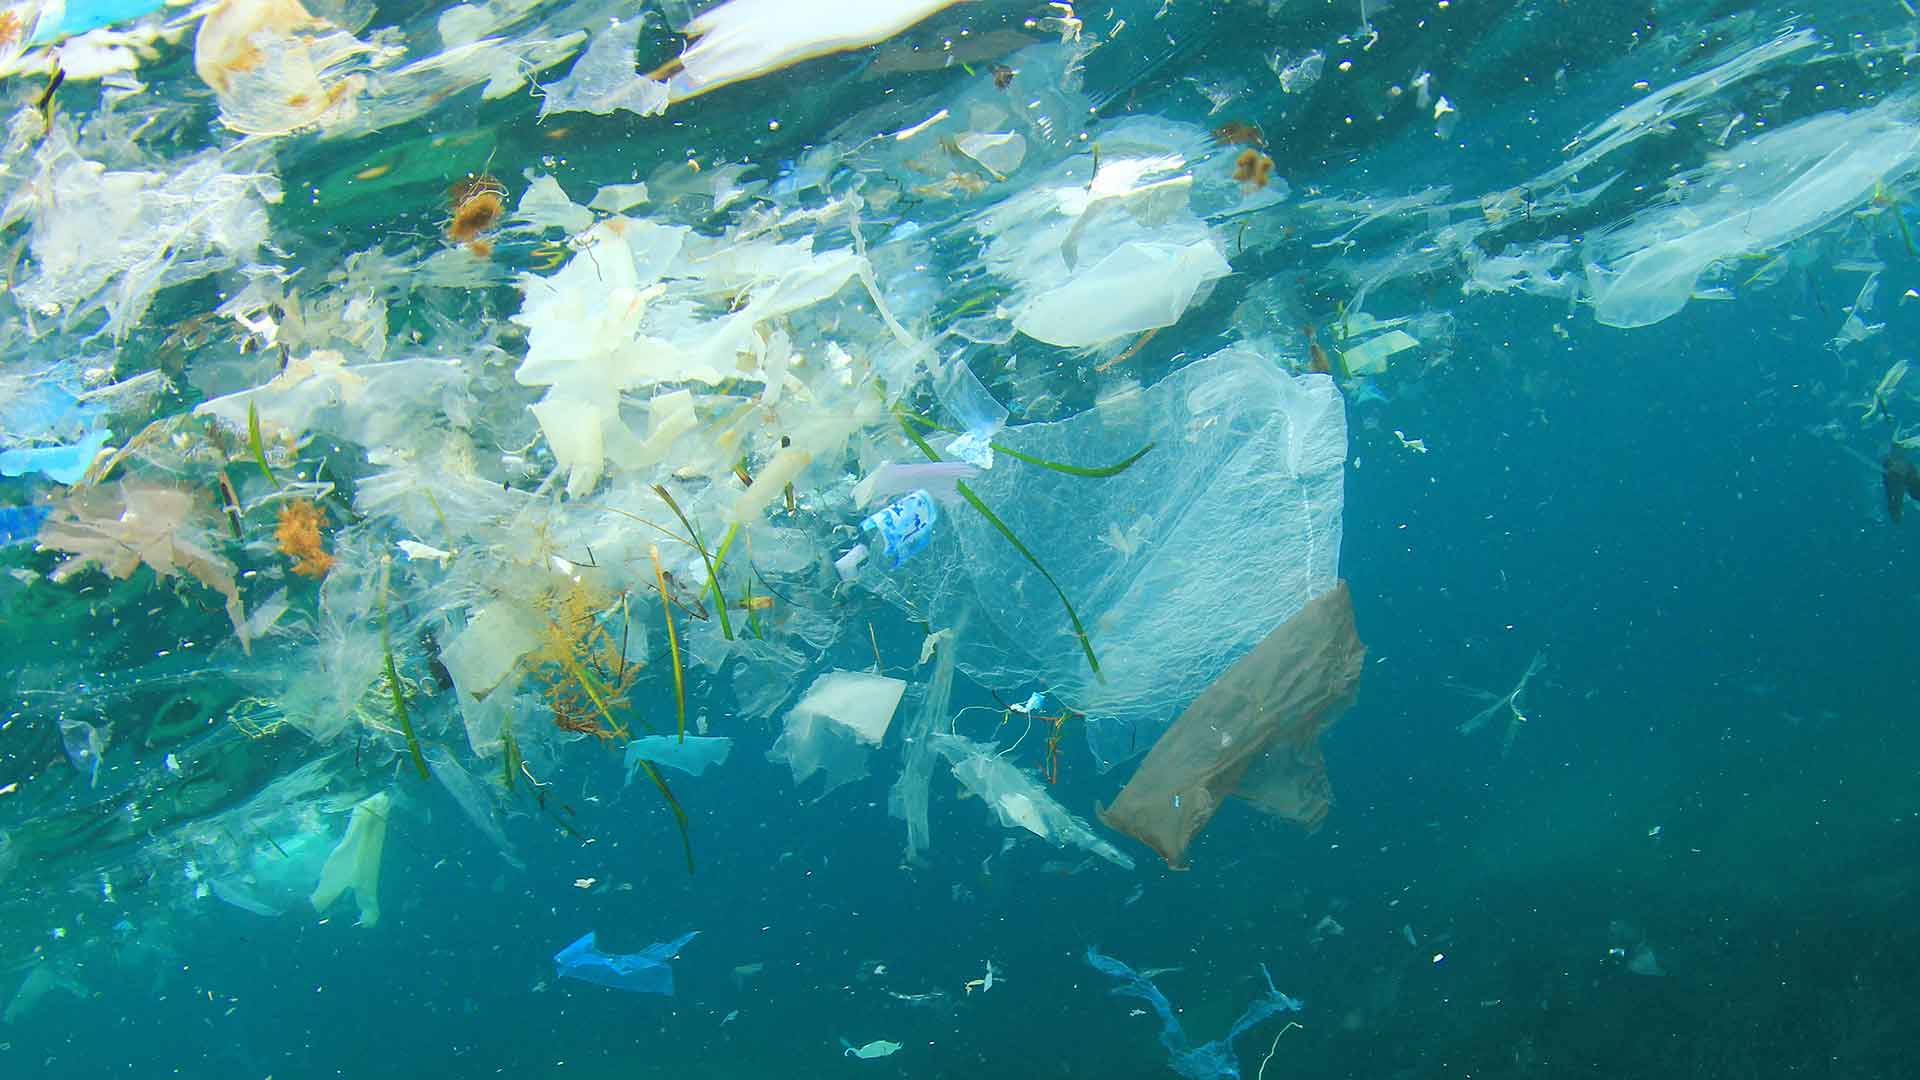 Plastic bags and waste in the ocean